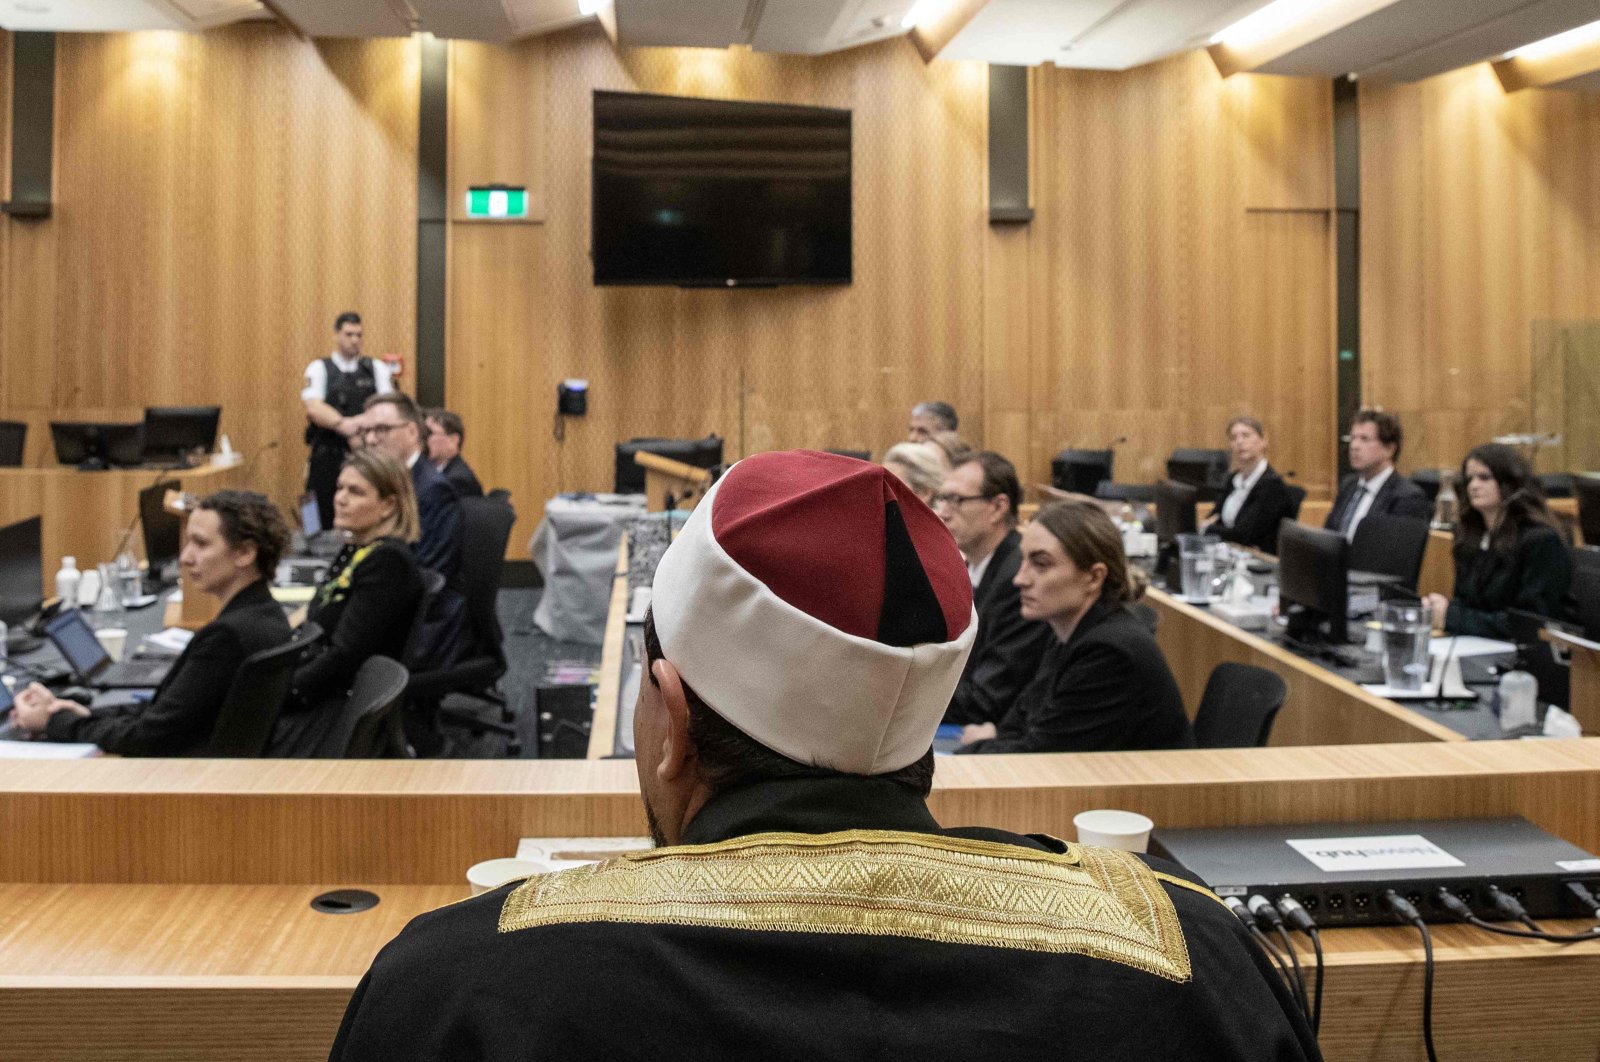 Al Noor Mosque Imam Gamal Fouda observes the proceedings at the opening of a coronial inquiry into the 2019 Christchurch massacre, in Christchurch, New Zealand, Oct. 24, 2023. (AFP Photo)